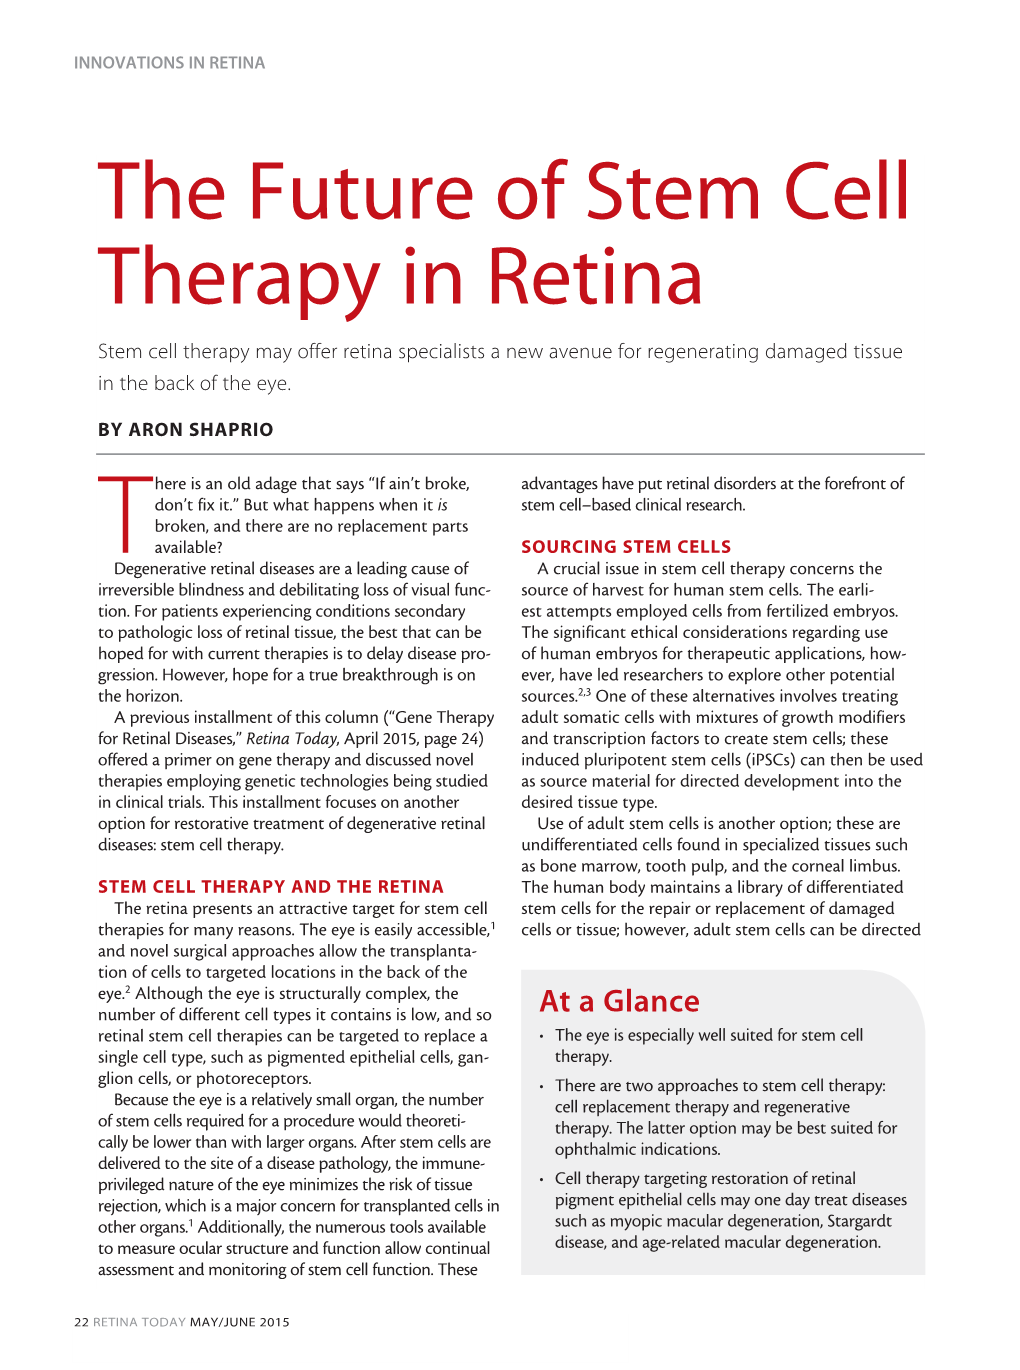 The Future of Stem Cell Therapy in Retina Stem Cell Therapy May Offer Retina Specialists a New Avenue for Regenerating Damaged Tissue in the Back of the Eye